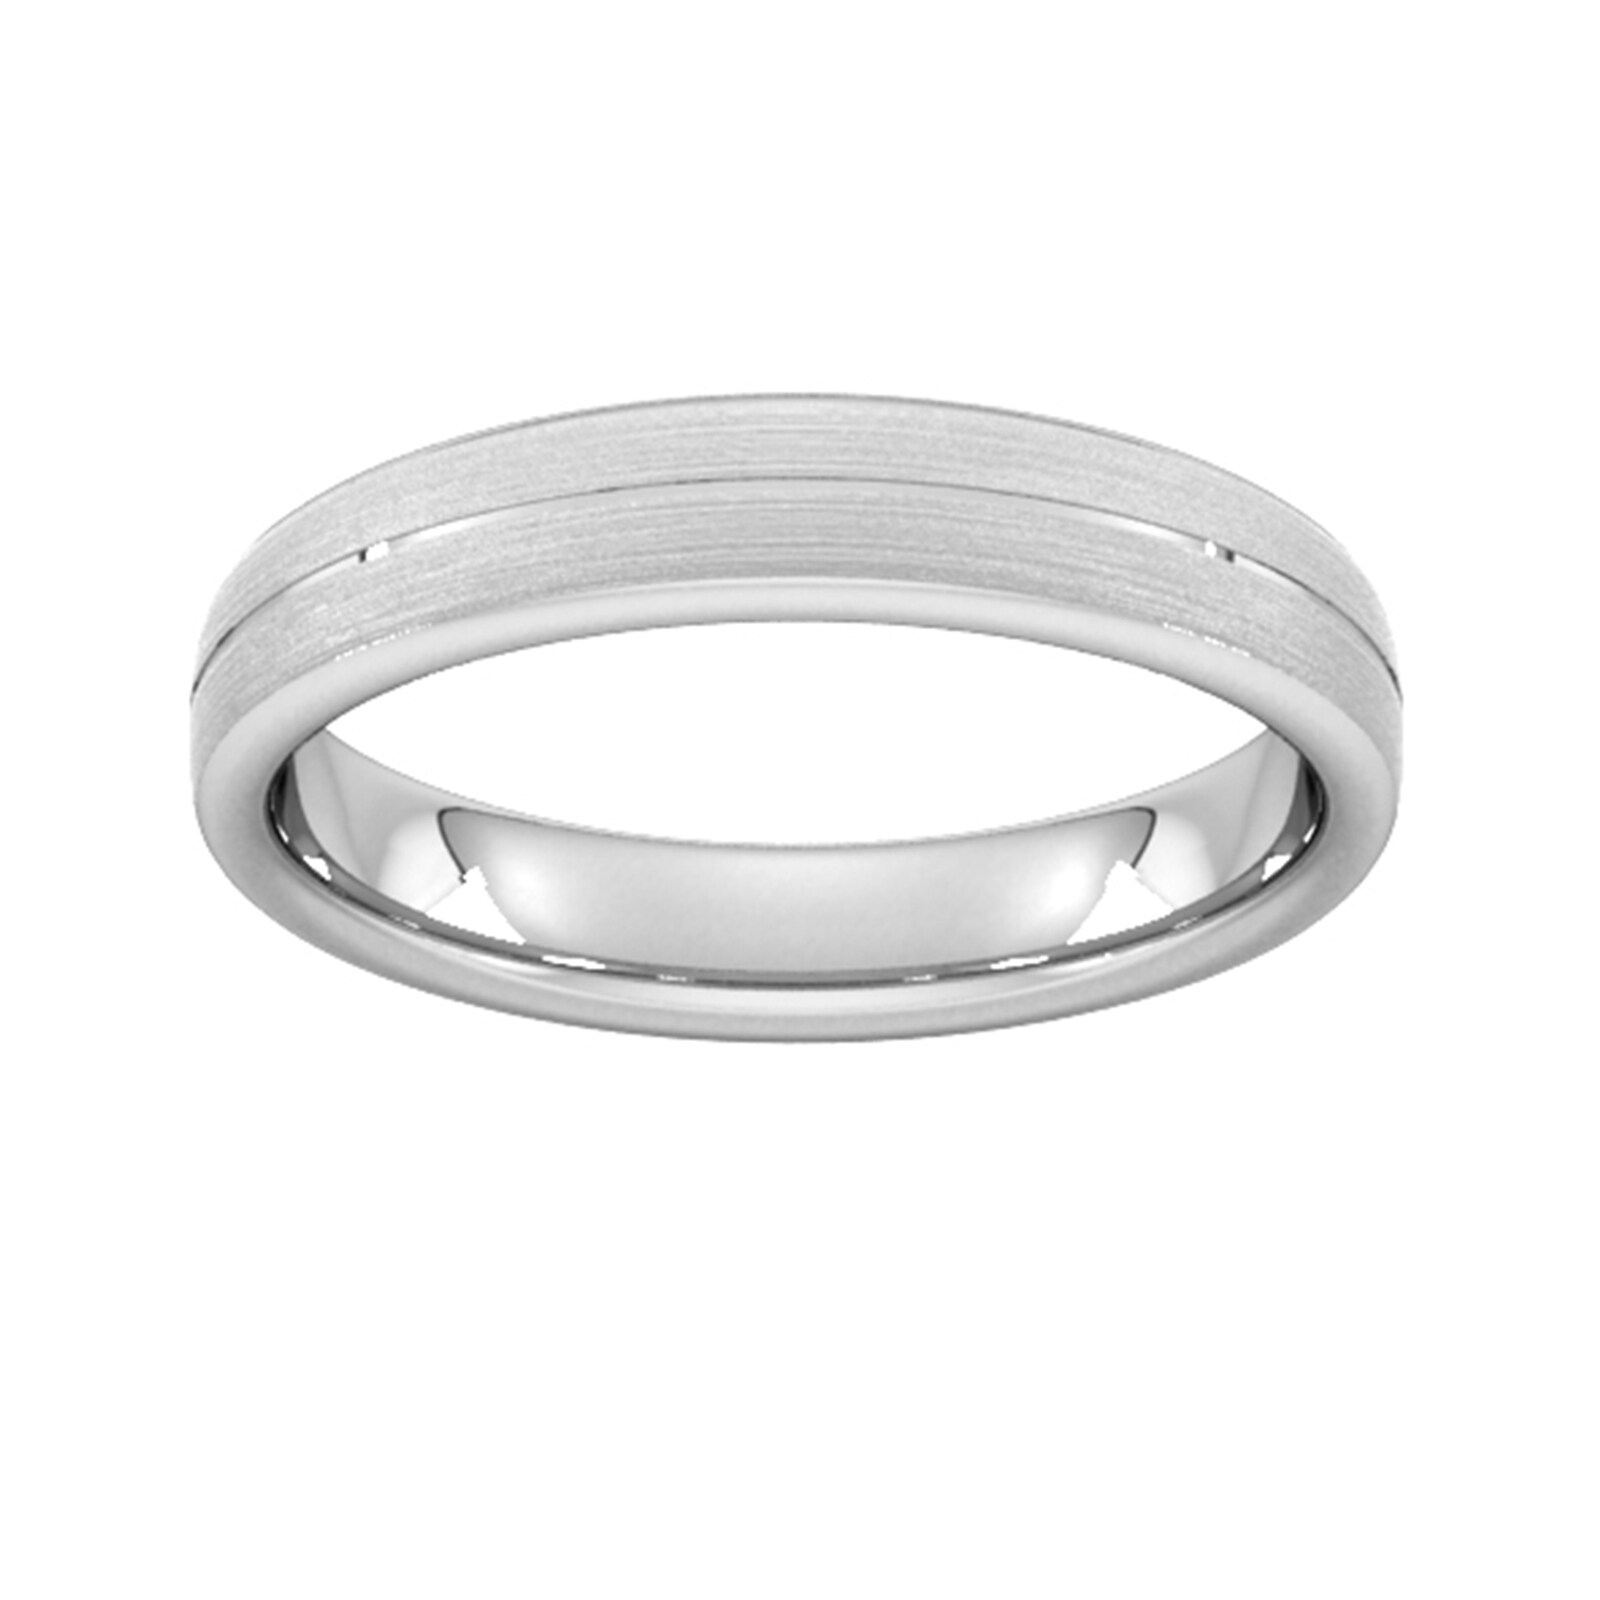 4mm Slight Court Heavy Centre Groove With Chamfered Edge Wedding Ring In 18 Carat White Gold - Ring Size J